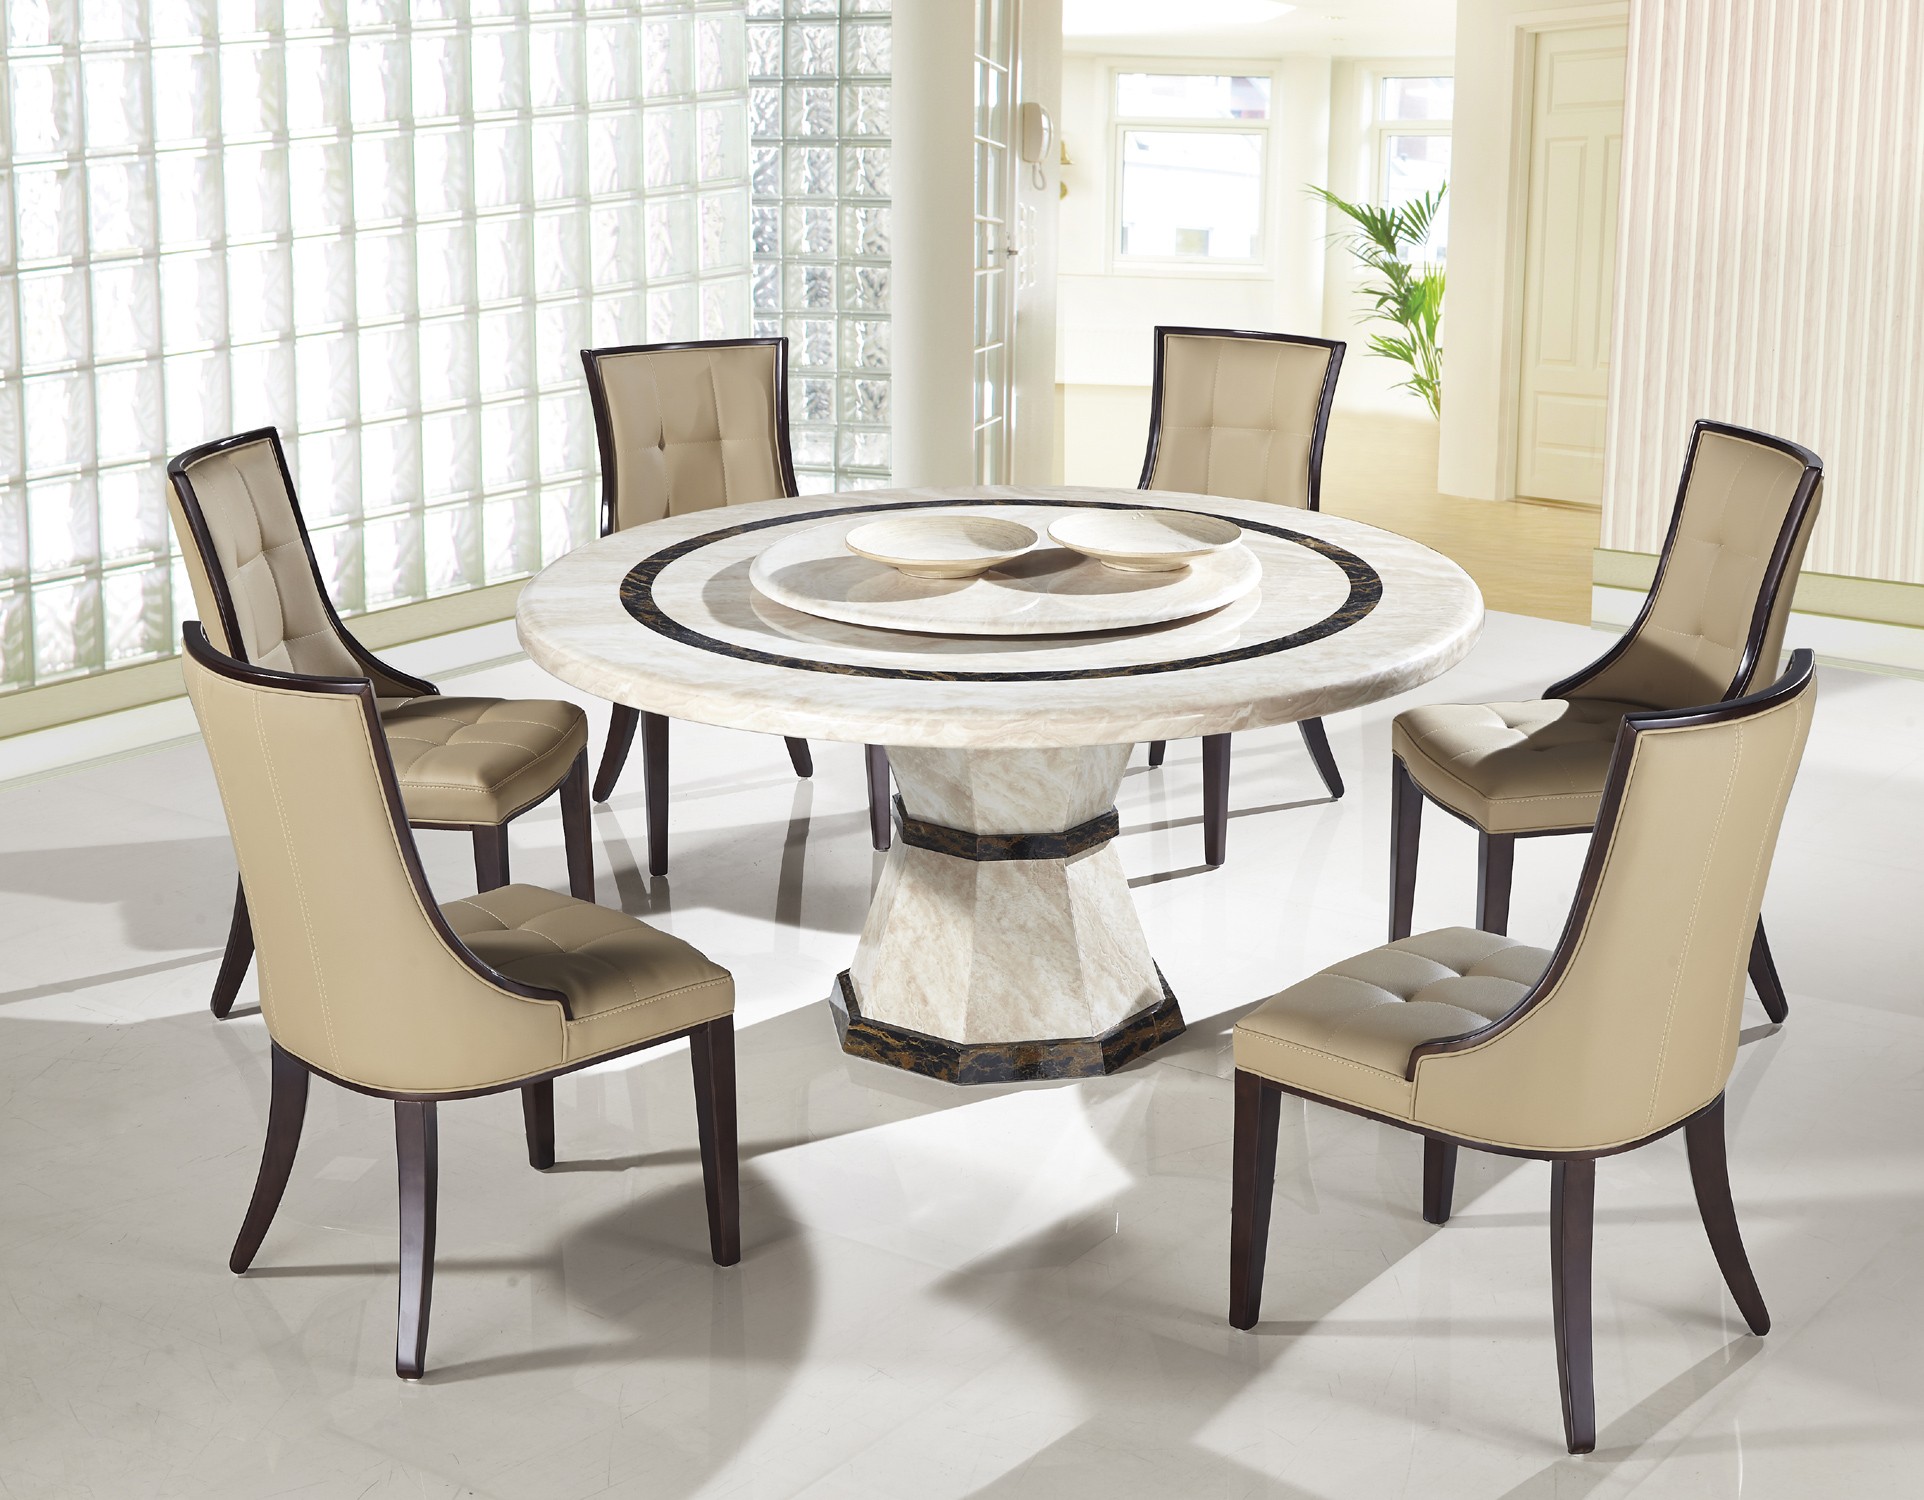 Contemporary Round Dining Room Table Sets